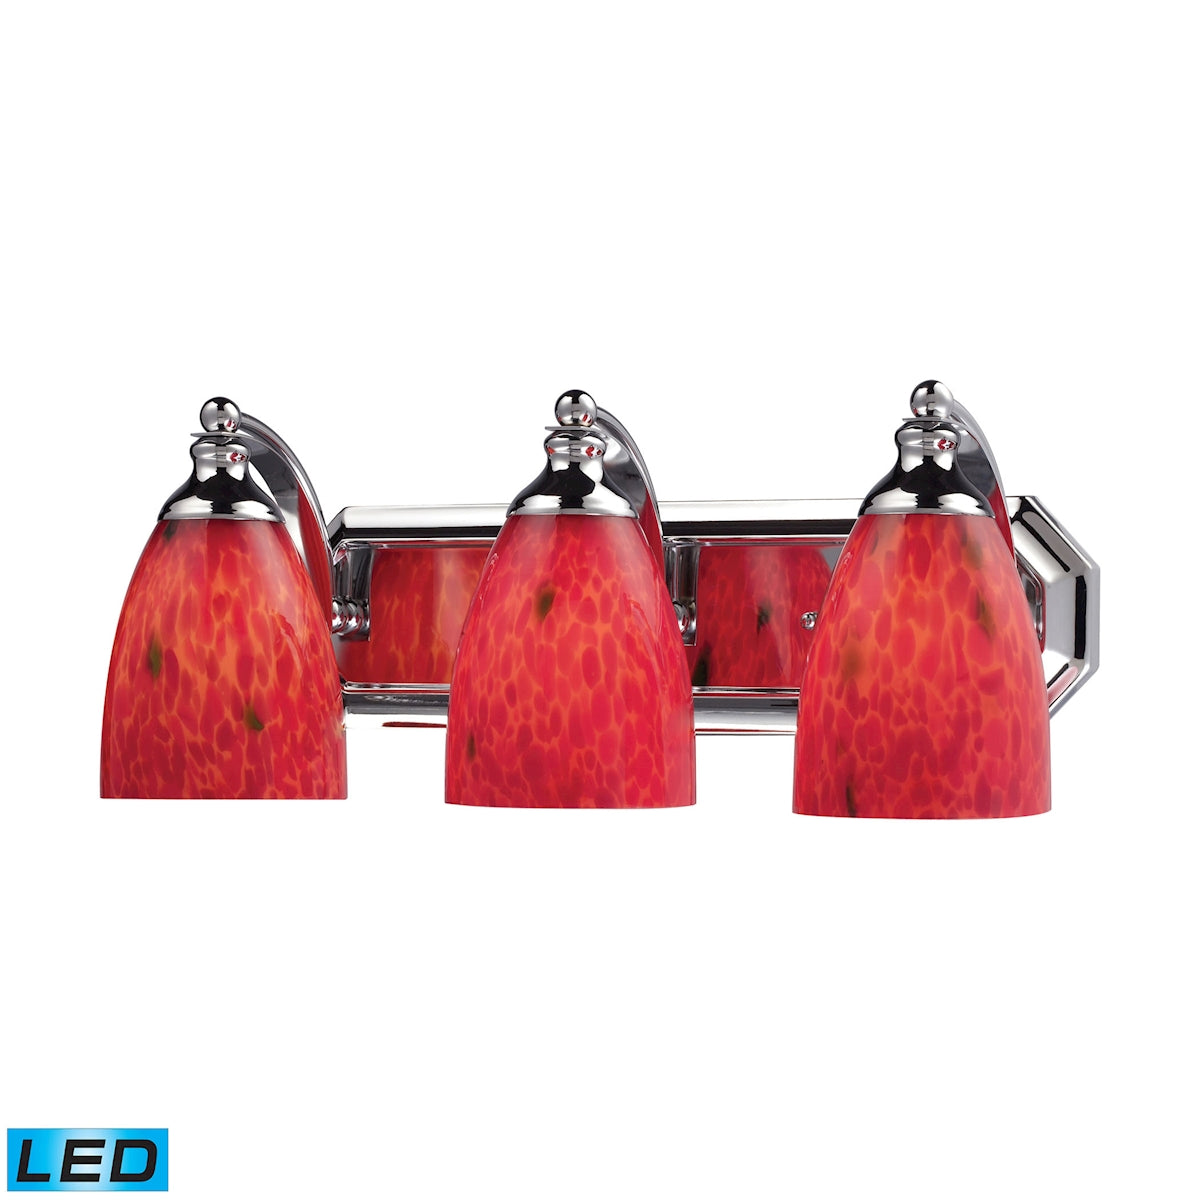 ELK Lighting 570-3C-FR-LED Mix and Match Vanity 3-Light Wall Lamp in Chrome with Fire Red Glass - Includes LED Bulbs